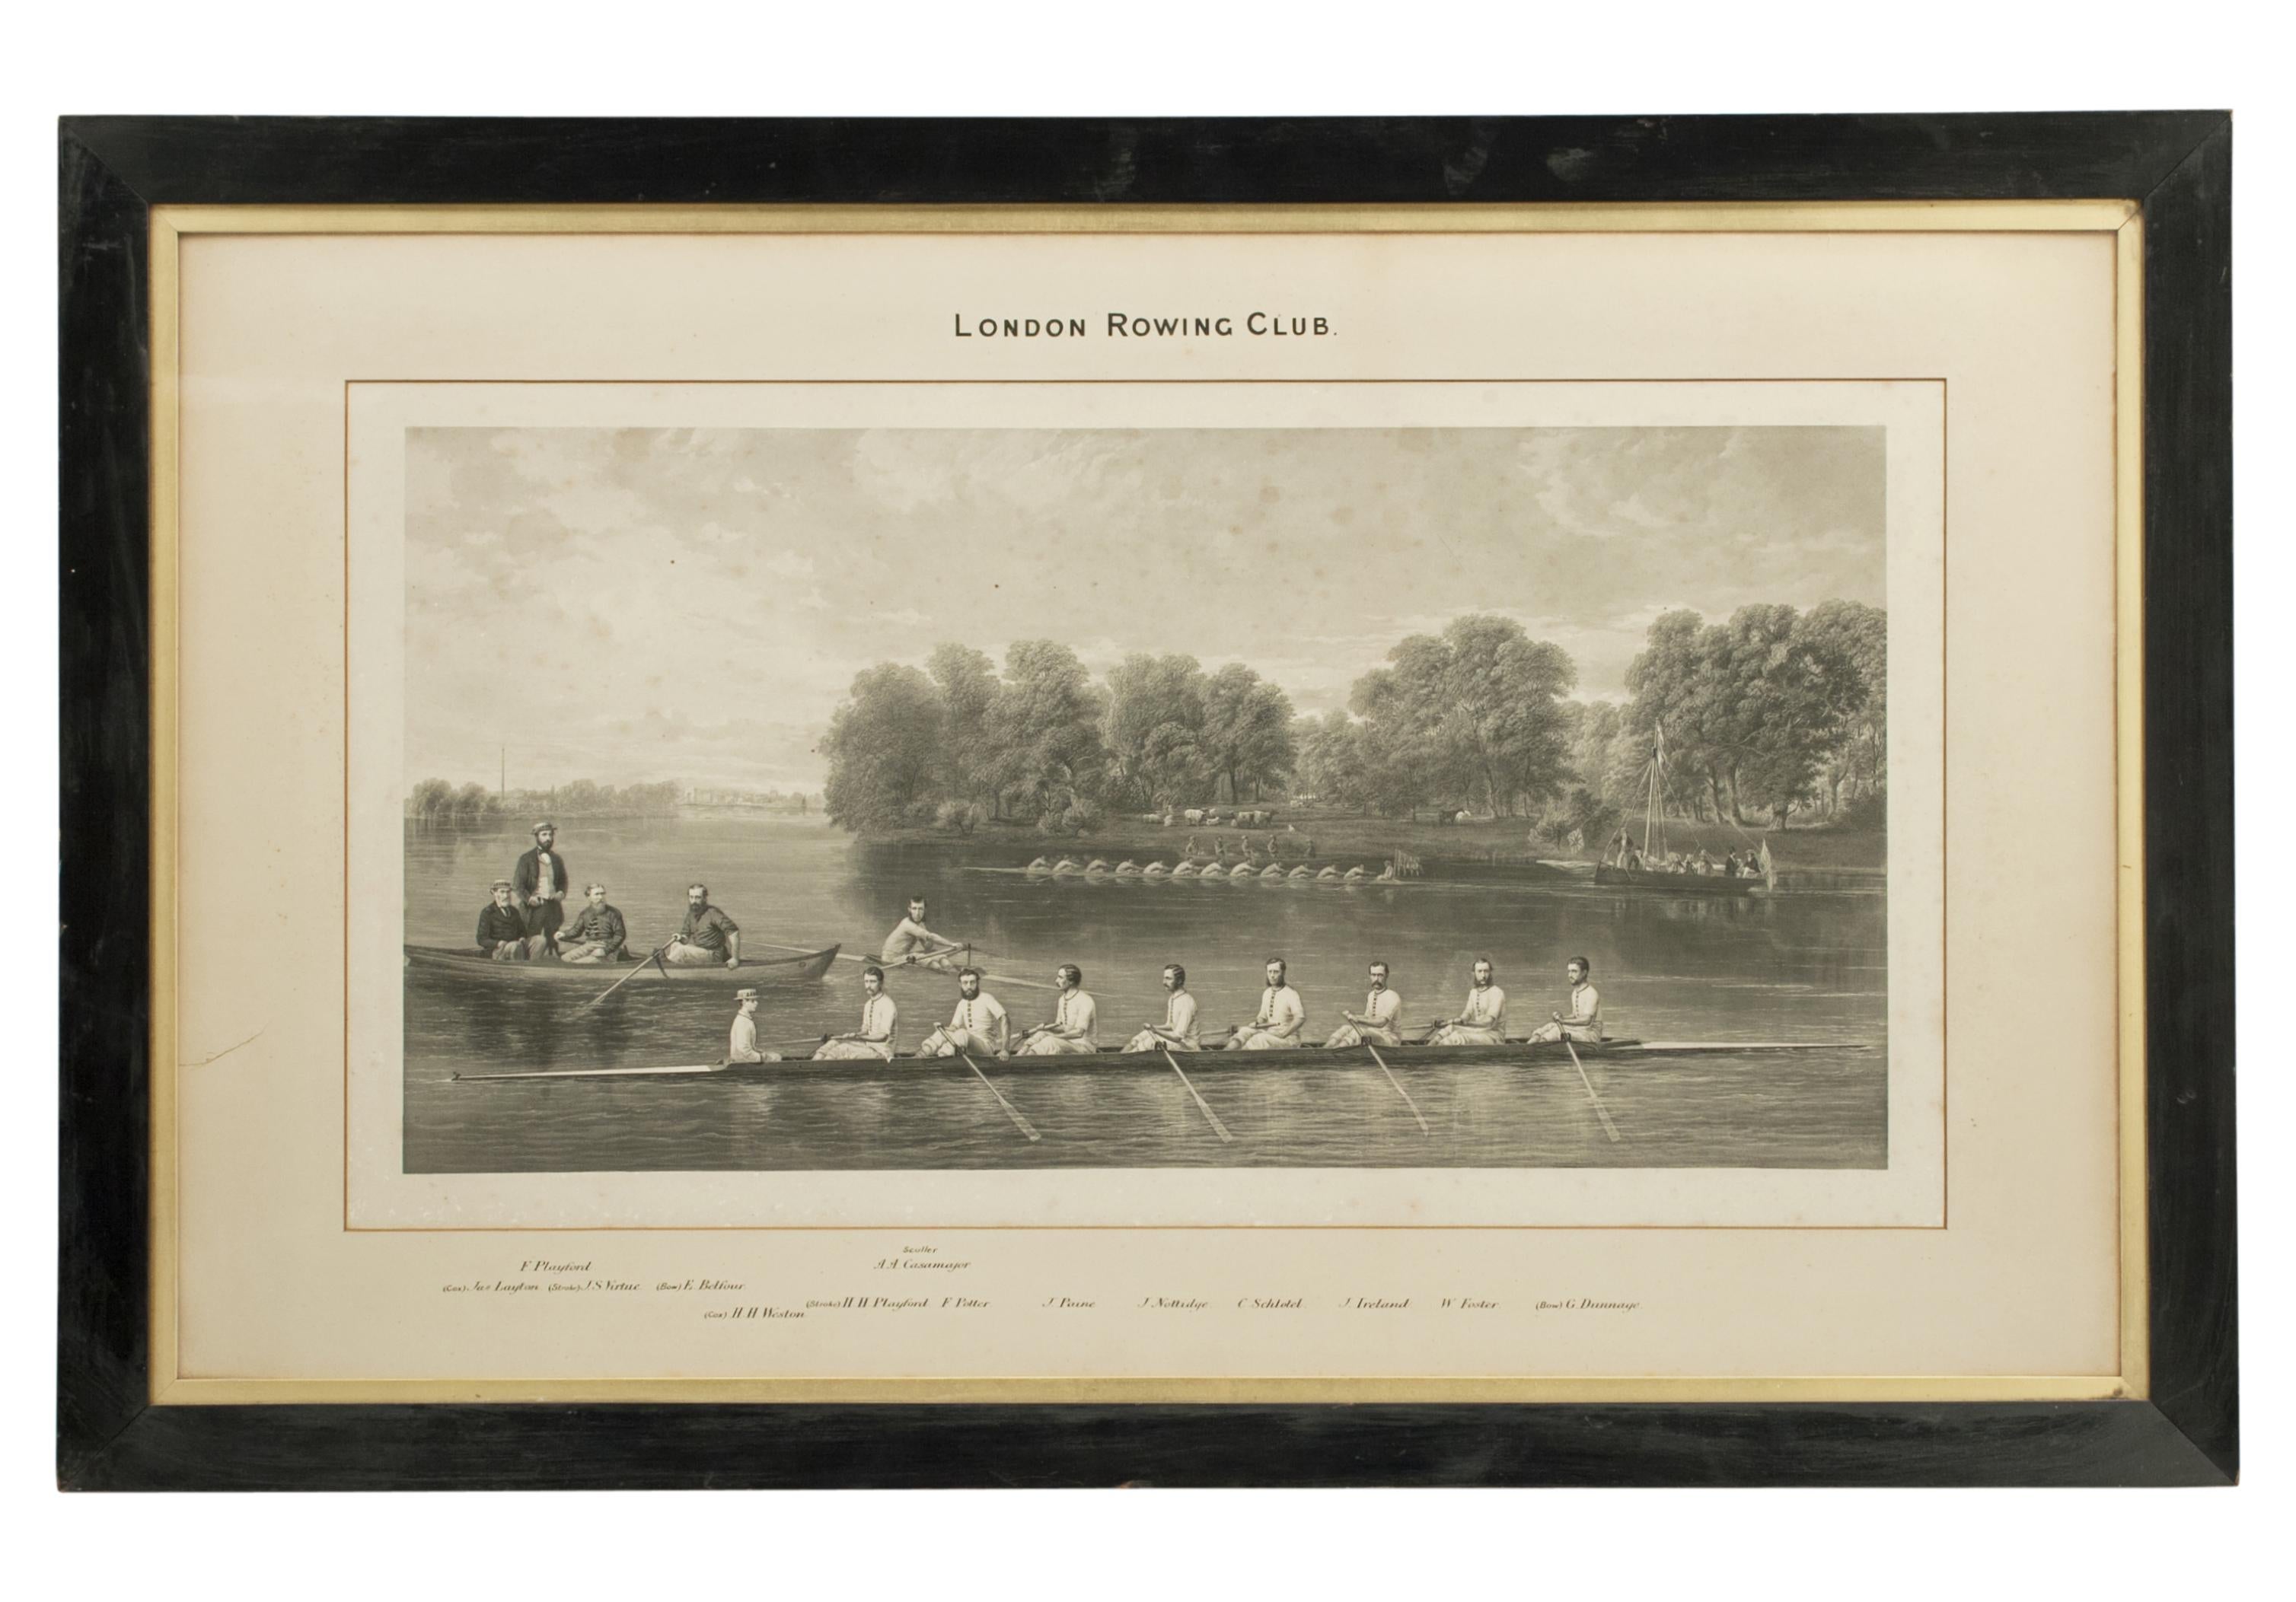 London Rowing Club Picture.
An original print of the London Rowing Club. The picture shows three rowing boats on the Thames, a single scull, an eight-oar sweep and a twelve-oar sweep, and three other boats. The twelve-oar boat has a flag flying at